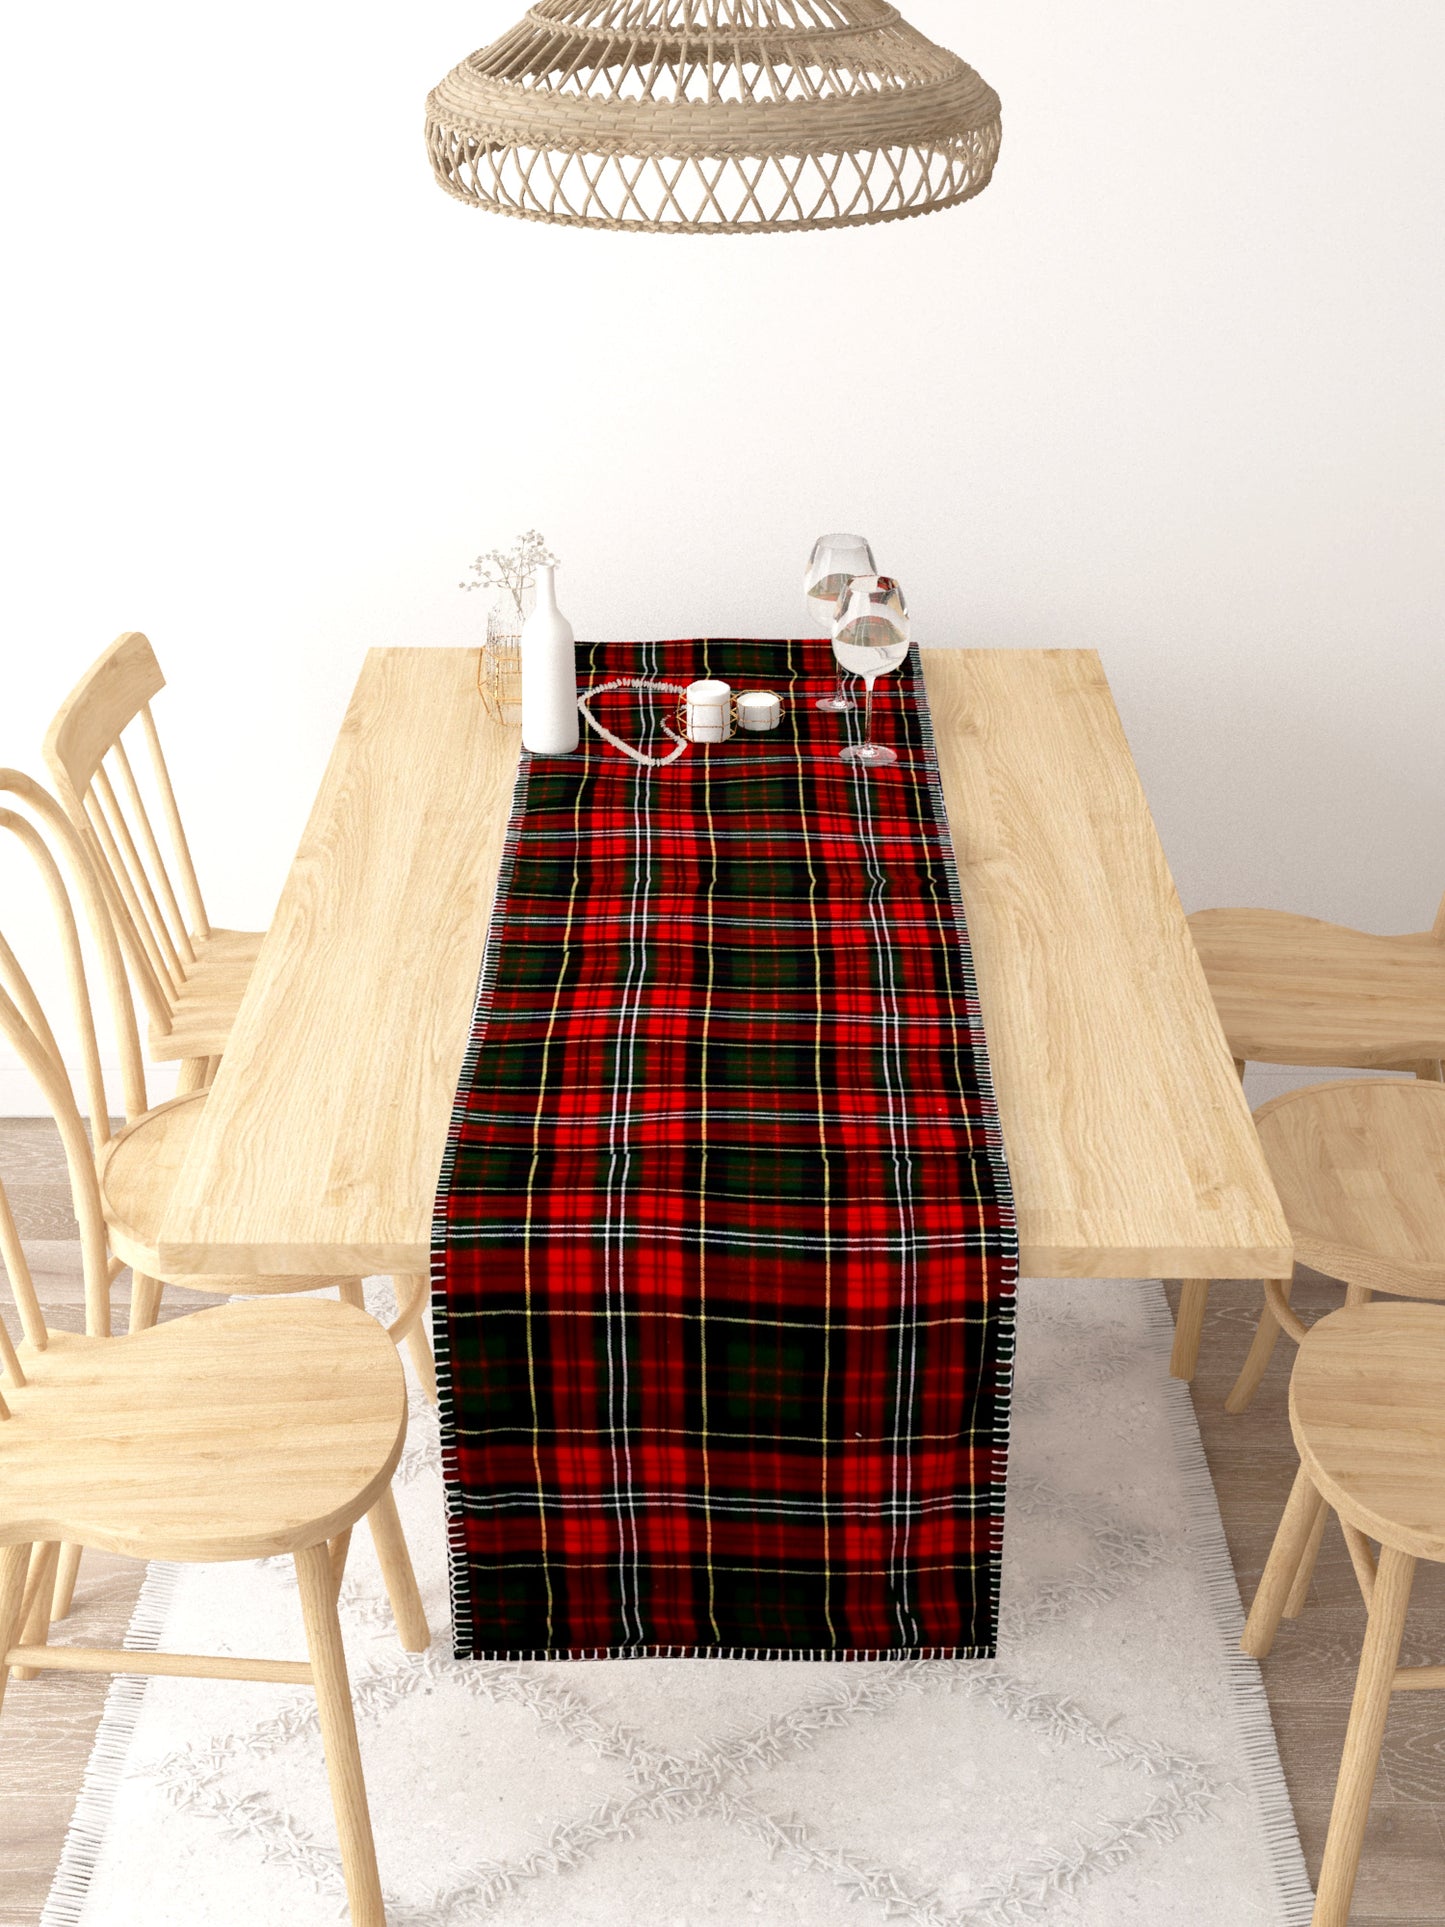 Cotton Table runner - 15X71 inches